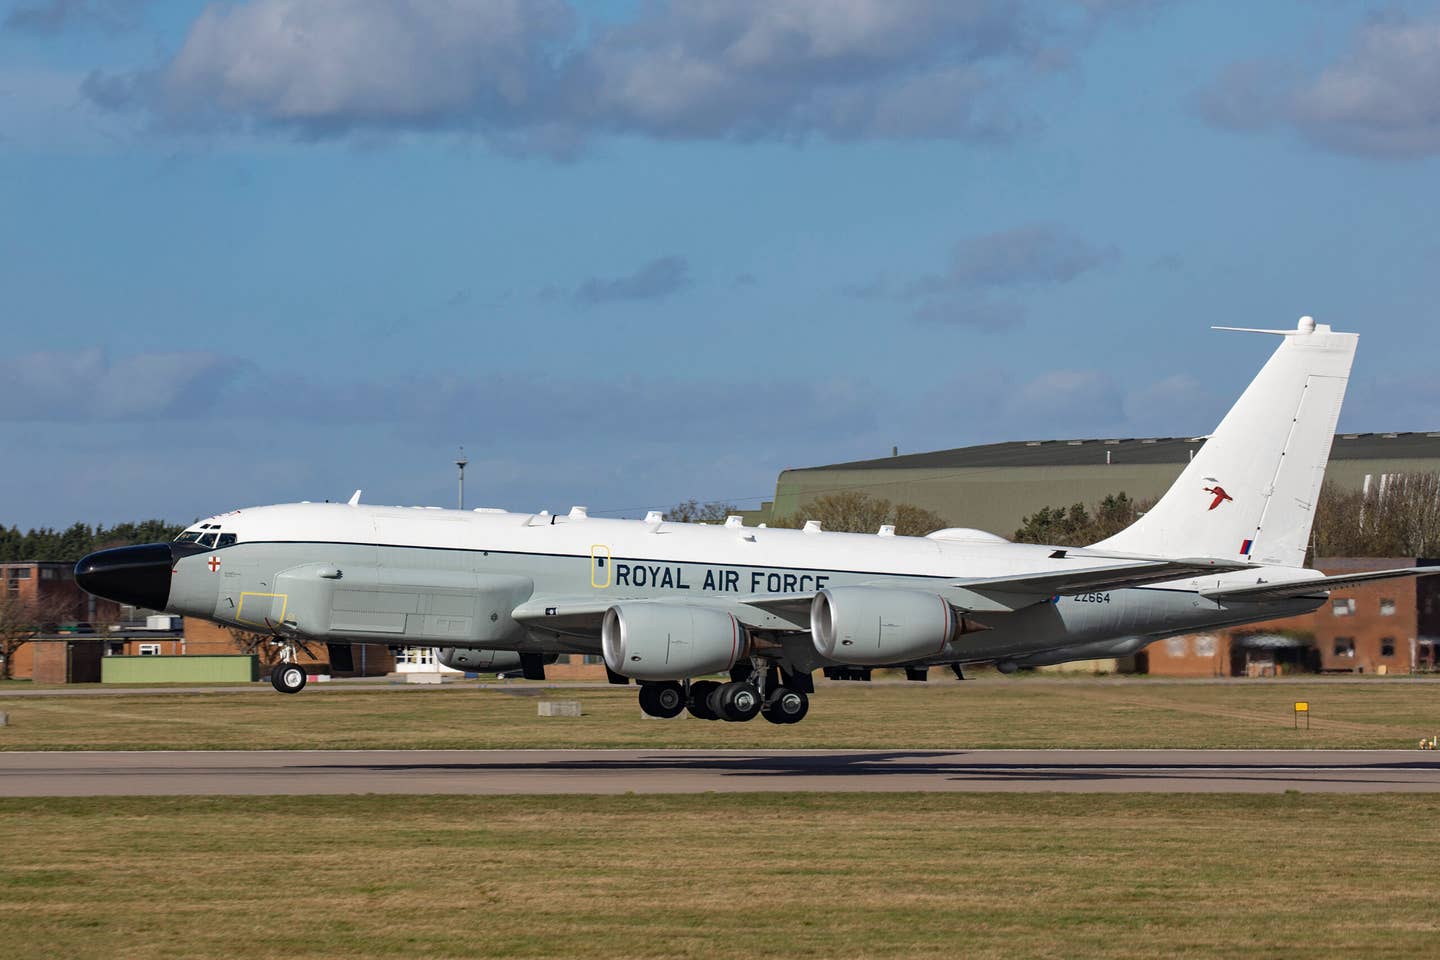 RC-135W Rivet Joint serial ZZ664 from No. 51 Squadron landing at RAF Waddington, England, on return from an exercise with NATO allies. This was apparently the aircraft involved in the incident over the Black Sea on September 29. <em>Crown Copyright</em>